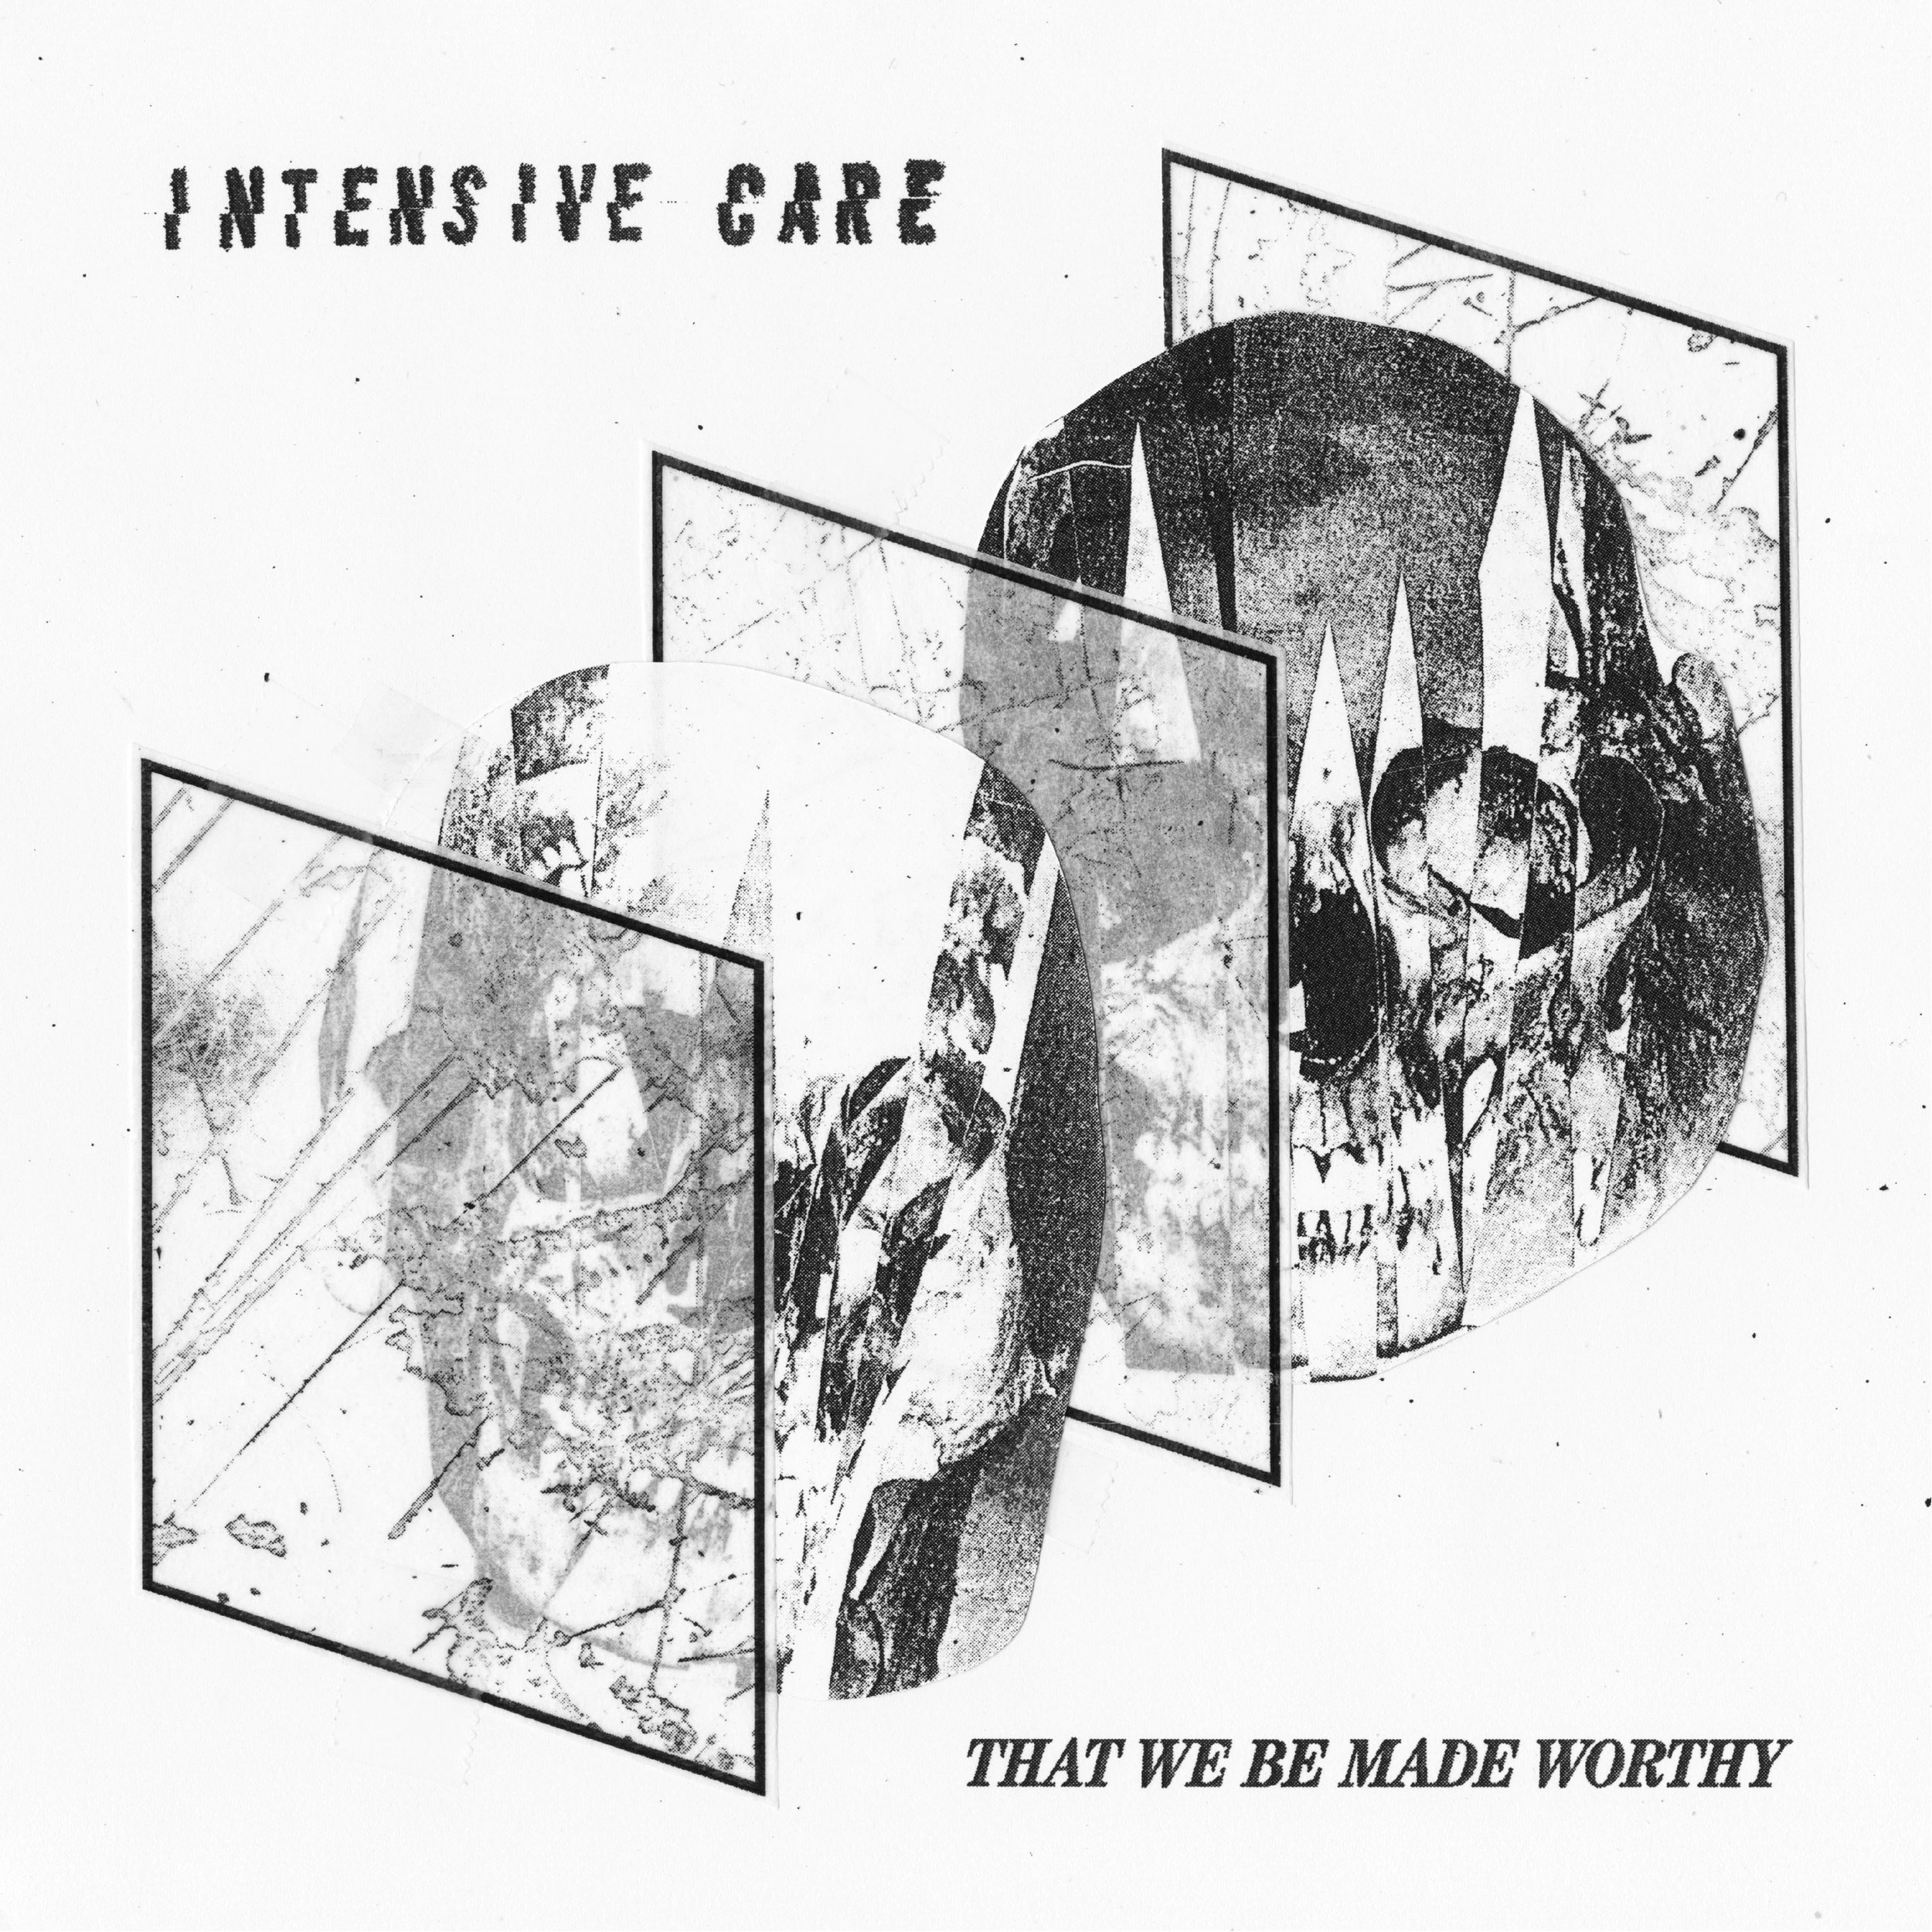 Intensive Care - That We Be Made Worthy - Cover.jpg